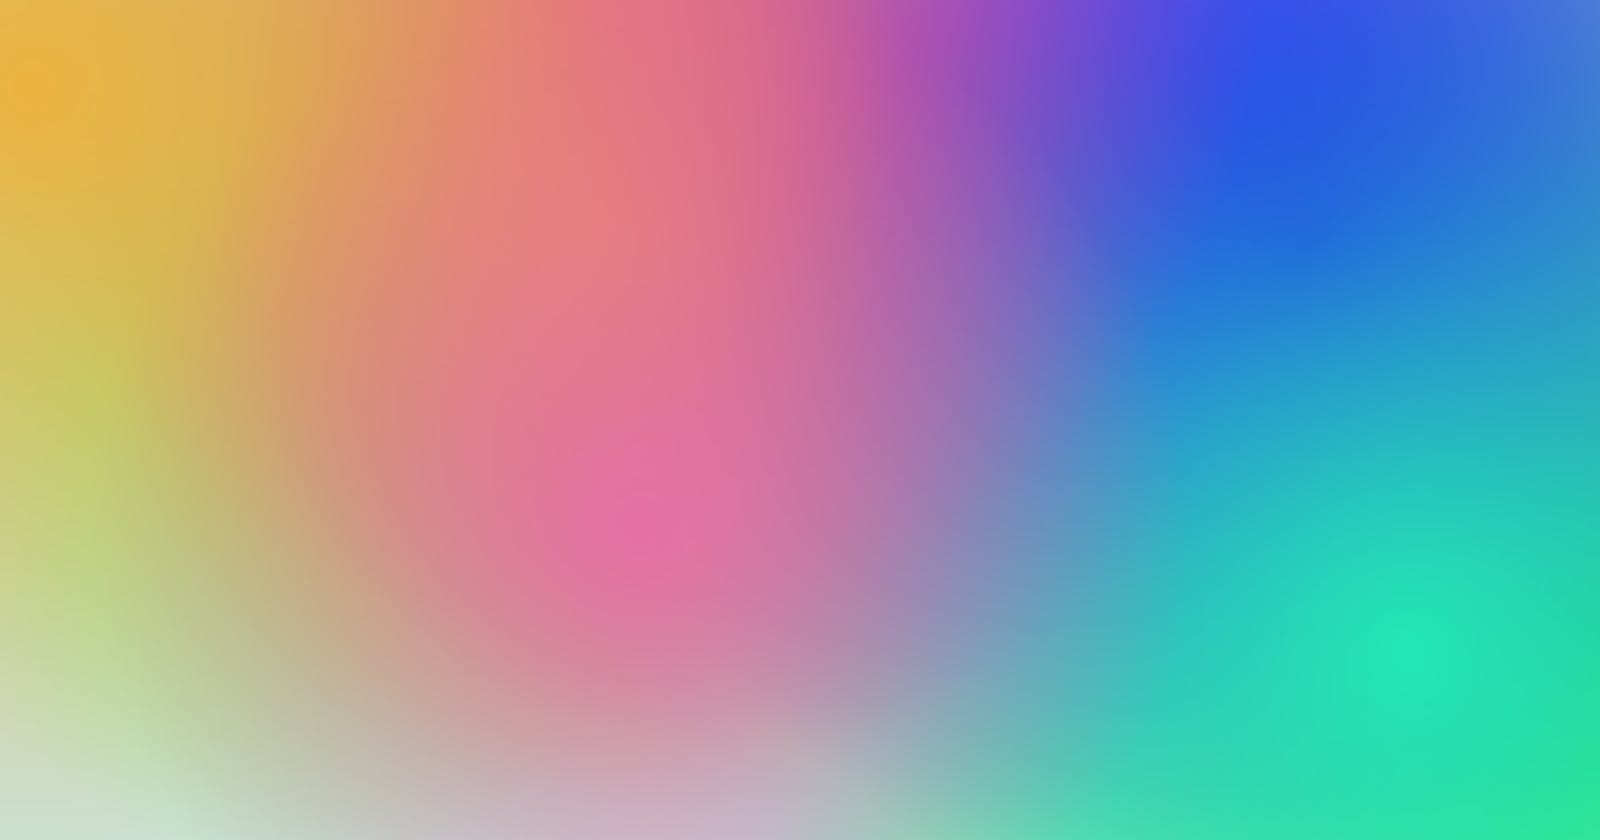 Tailwind Gradients - How to Make a Glowing Gradient Background